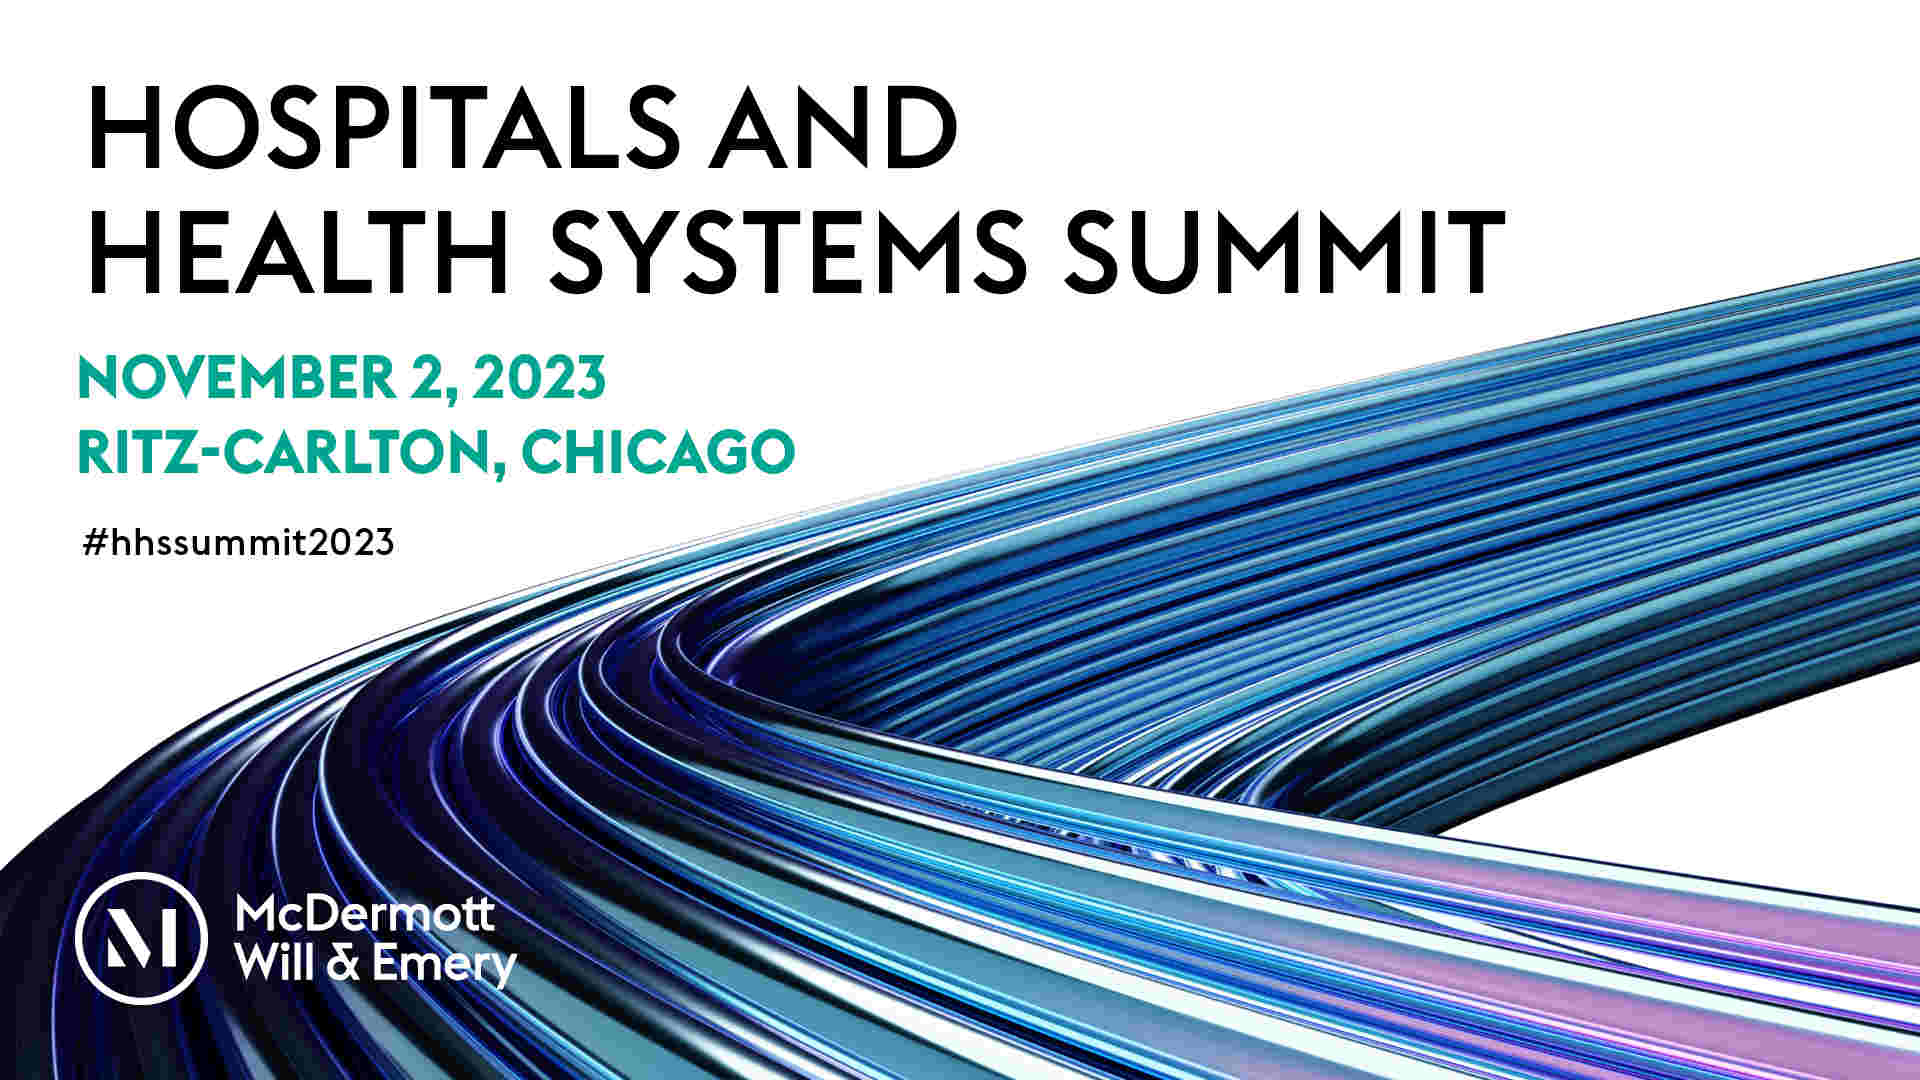 Hospitals and Health Systems Summit 2023